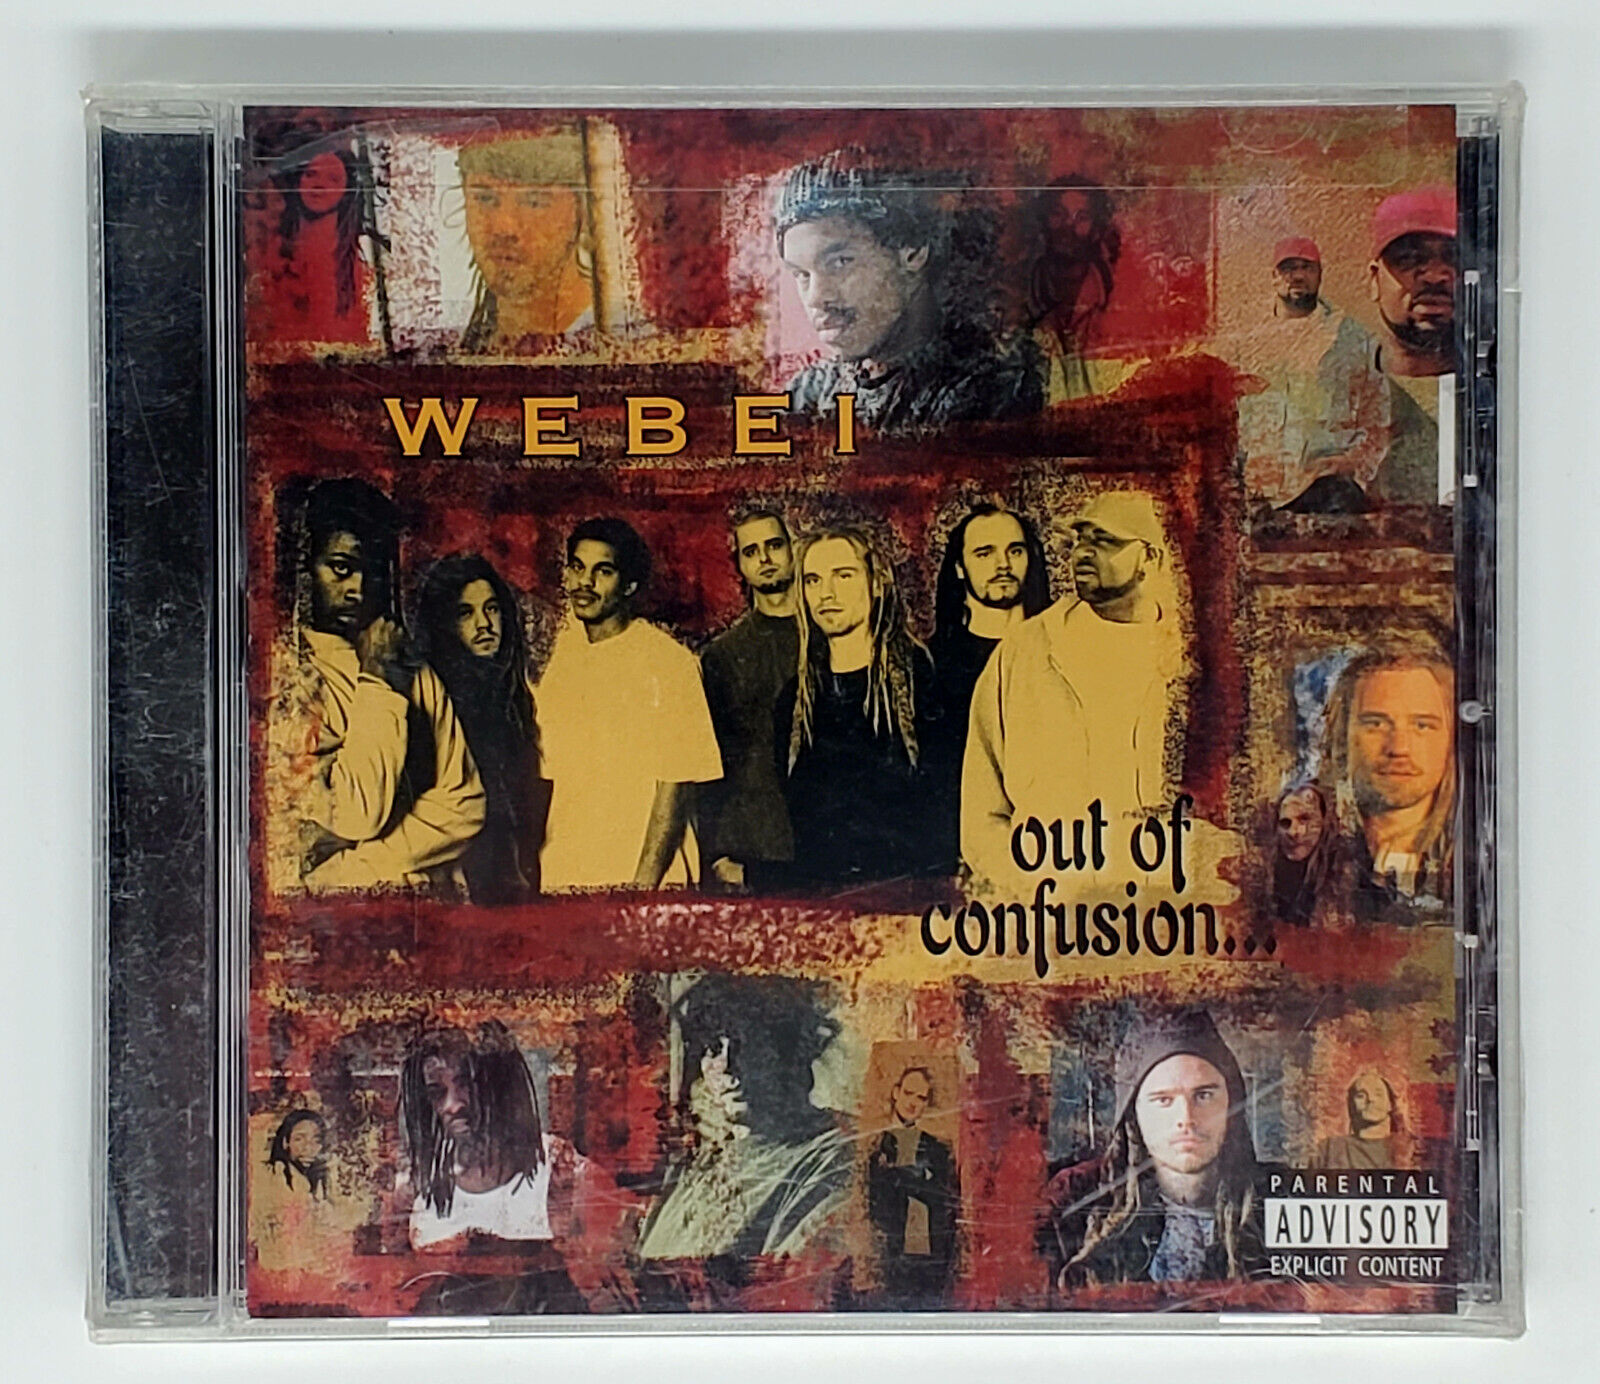 VTG Rap CD - We Be I (WEBEI) Out of Confusion... - Brand New 2003 We Be Records